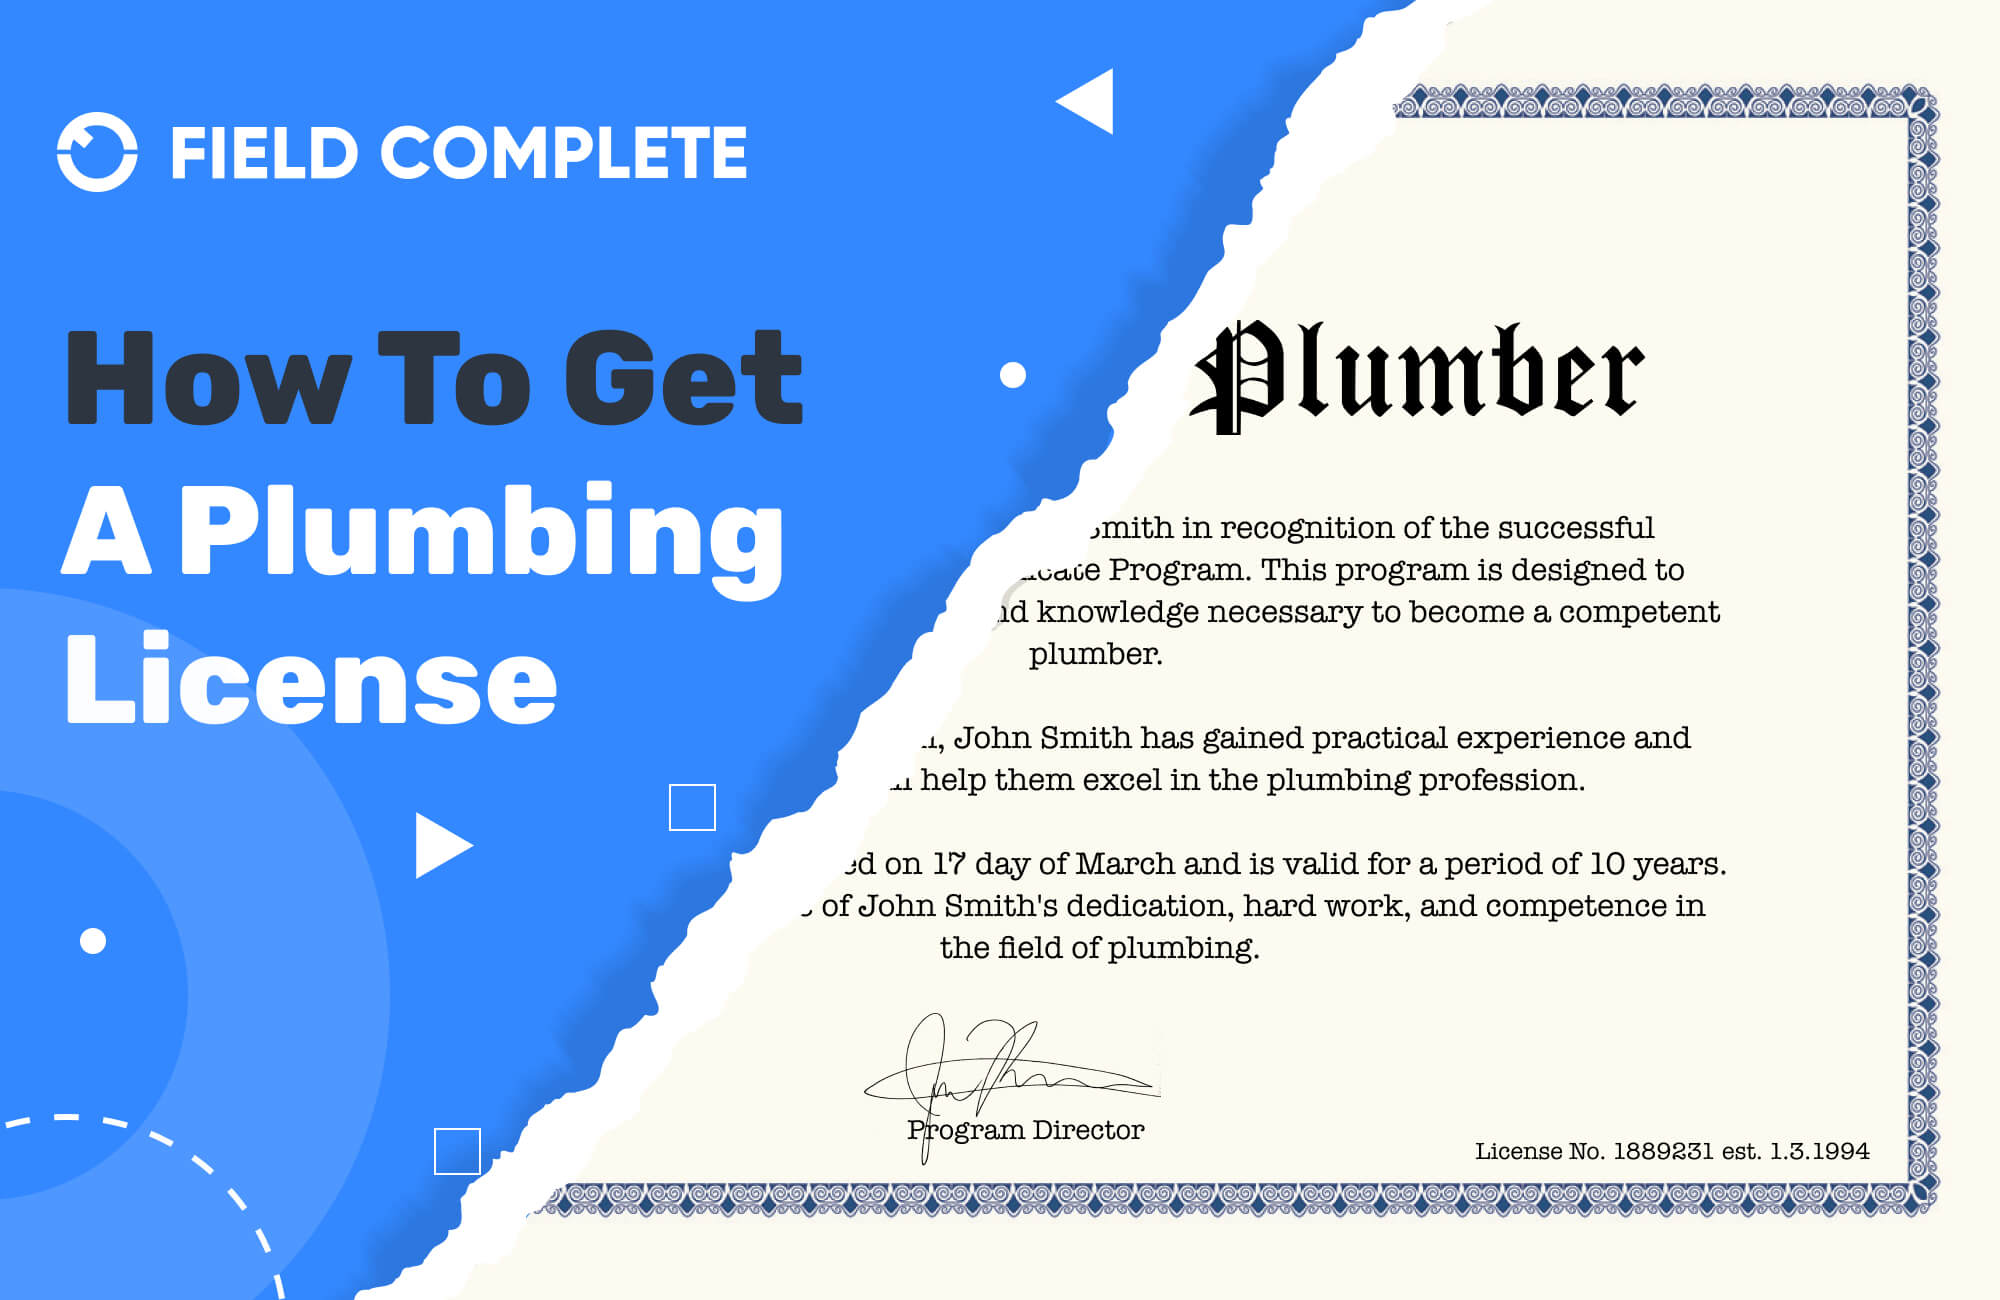 How to Get a Plumbing License